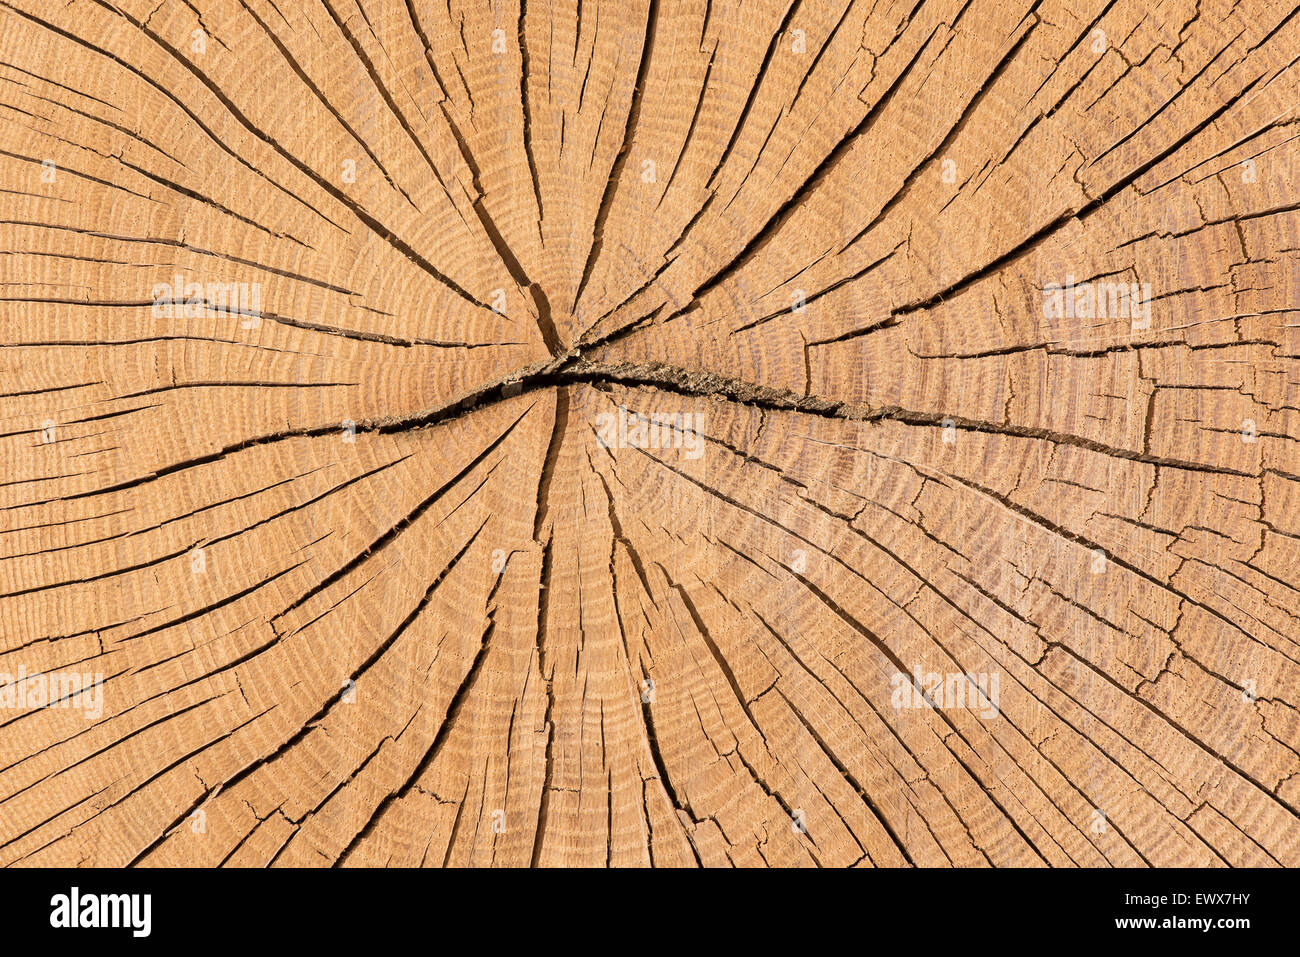 Sectional area of oak (Quercus sp.) trunk with annual rings, Baden-Württemberg, Germany Stock Photo